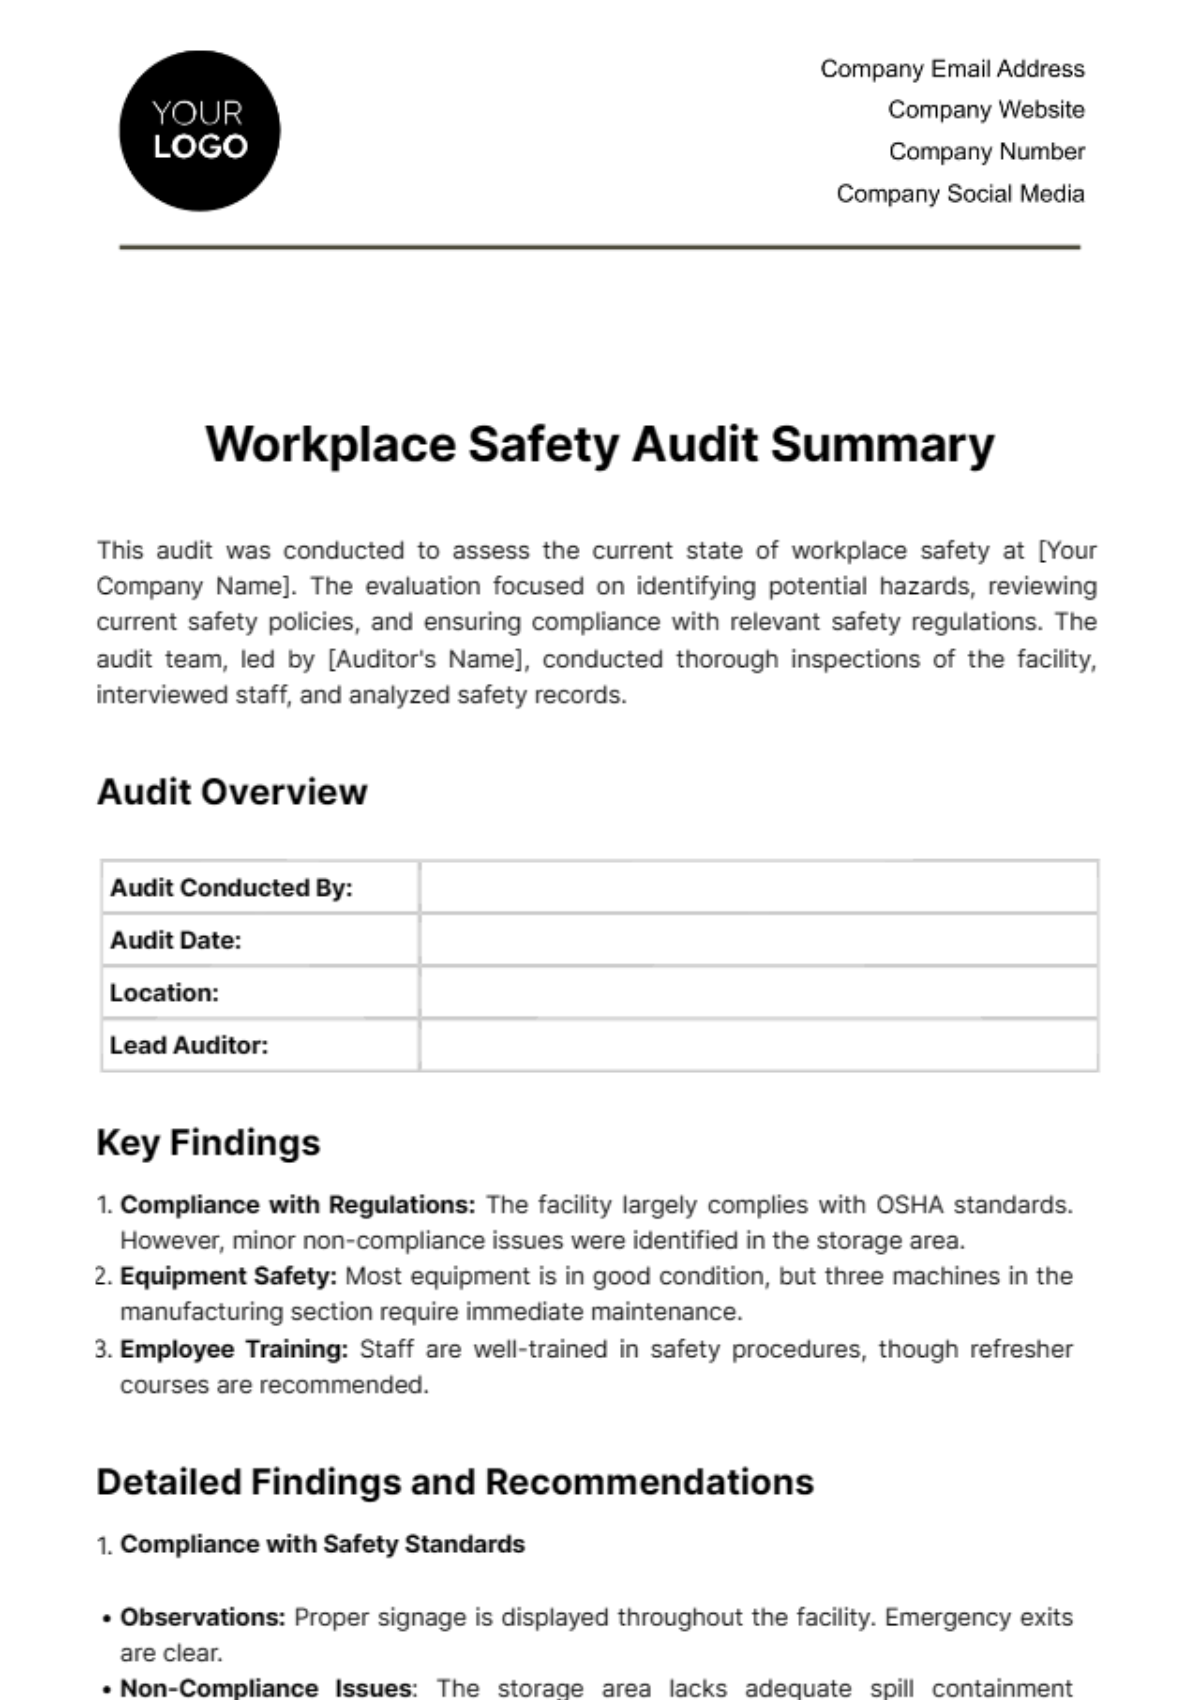 Workplace Safety Audit Summary Template